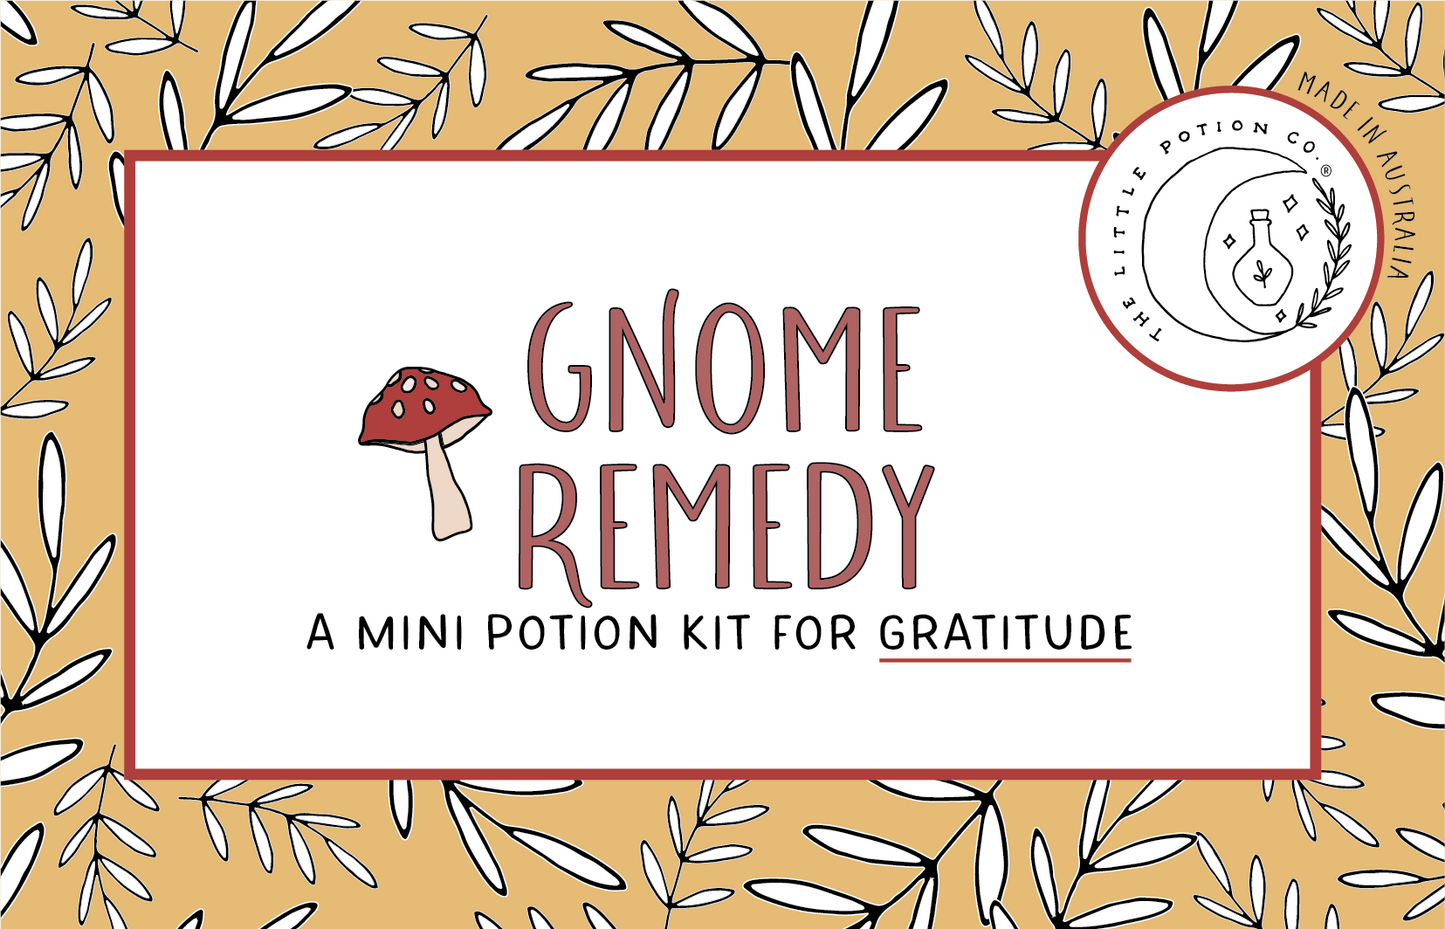 Load image into Gallery viewer, Mini Potion Kit | Gnome Remedy
